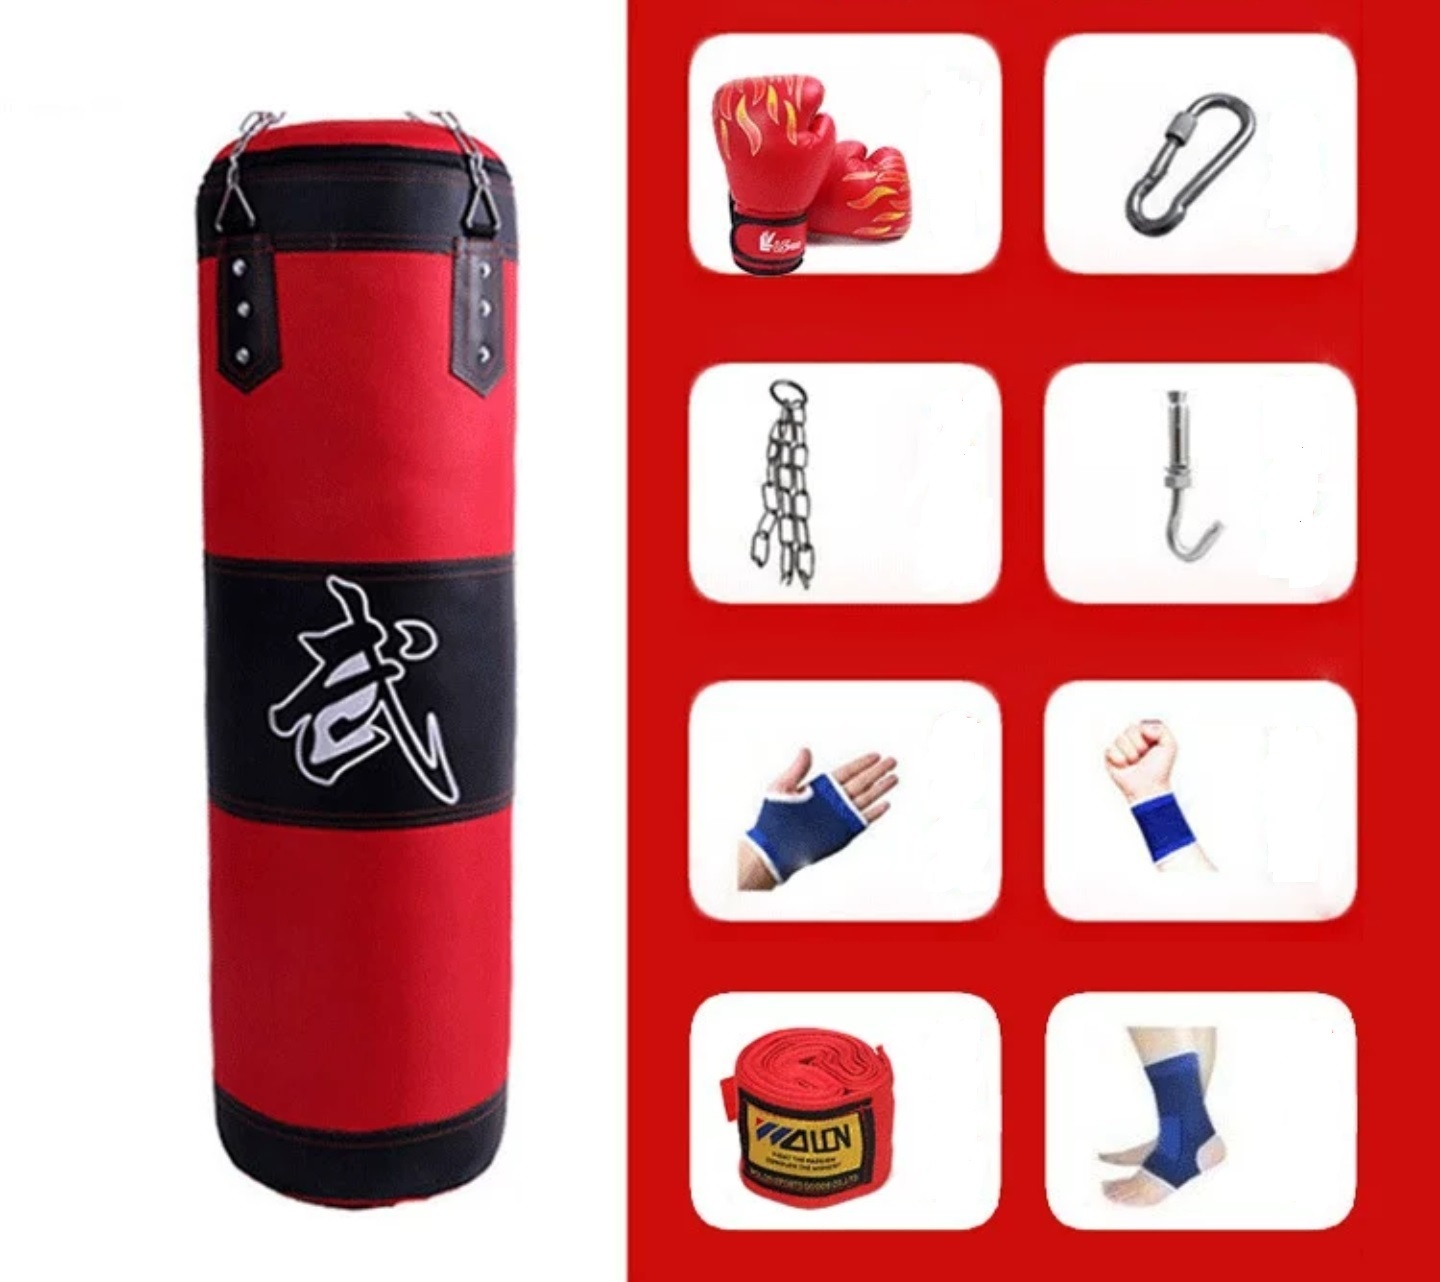 How to Get Rid of Sinking Heavy Bag Filling? - PunchingBagsGuide